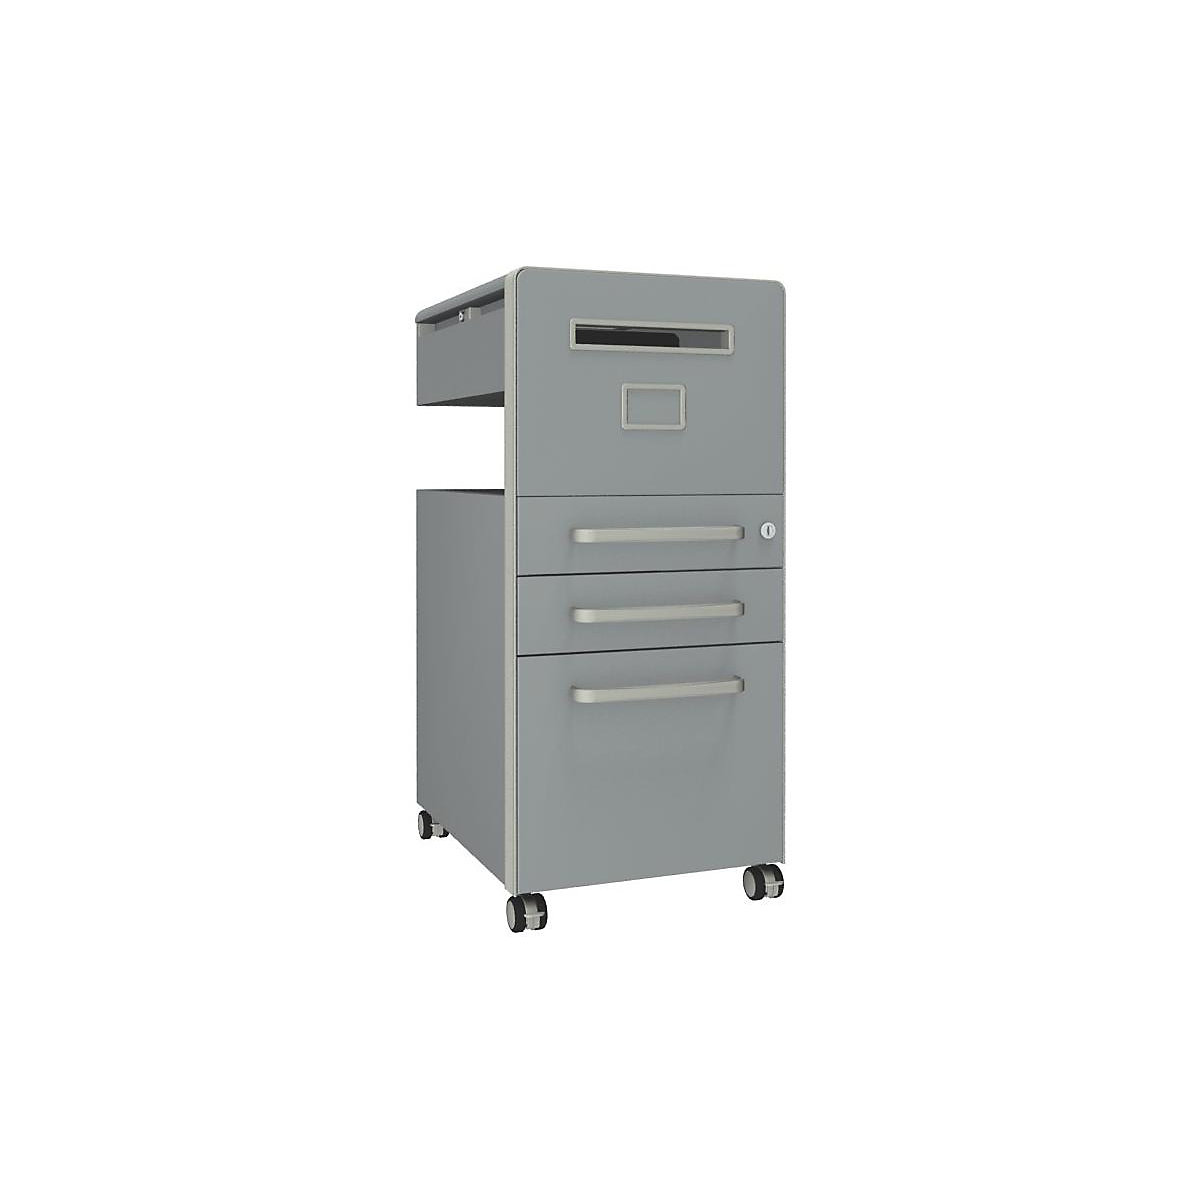 Bite™ pedestal furniture, with 1 whiteboard, opens on the right side – BISLEY, with 2 universal drawers, 1 suspension file drawer, silver, smooth paint finish-14